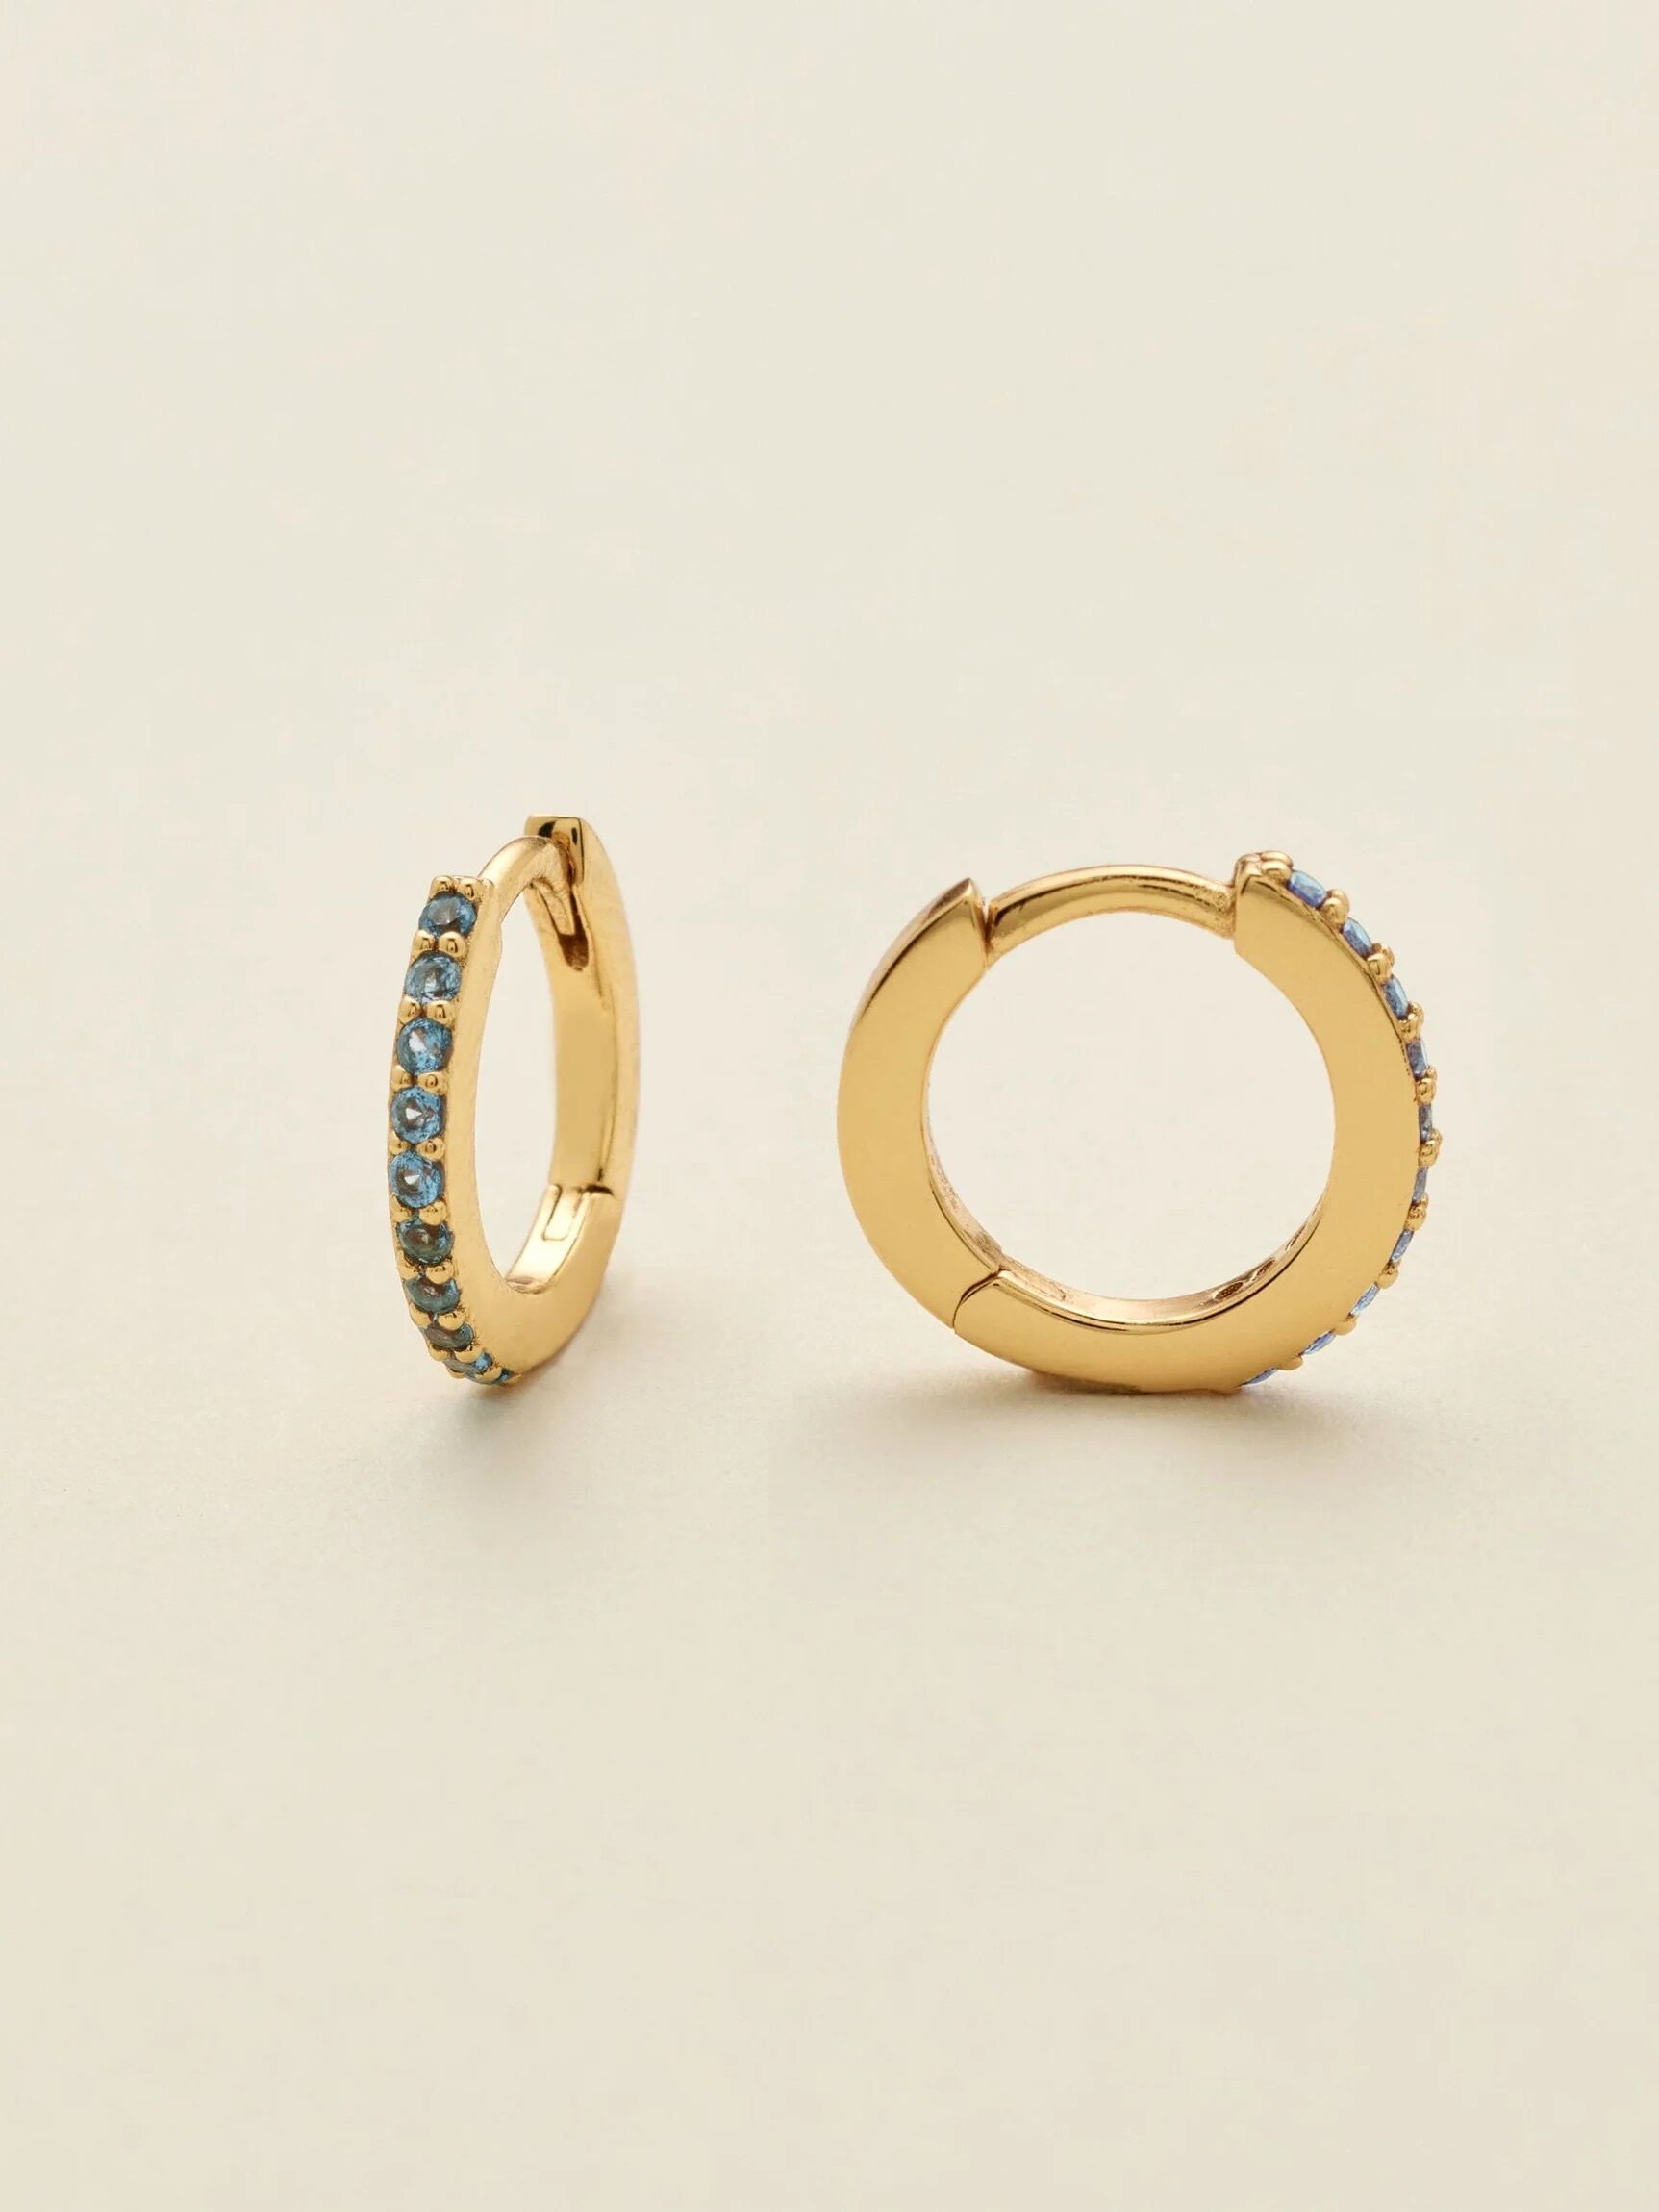 A pair of gold hoop earrings with blue gemstone accents on a light background.